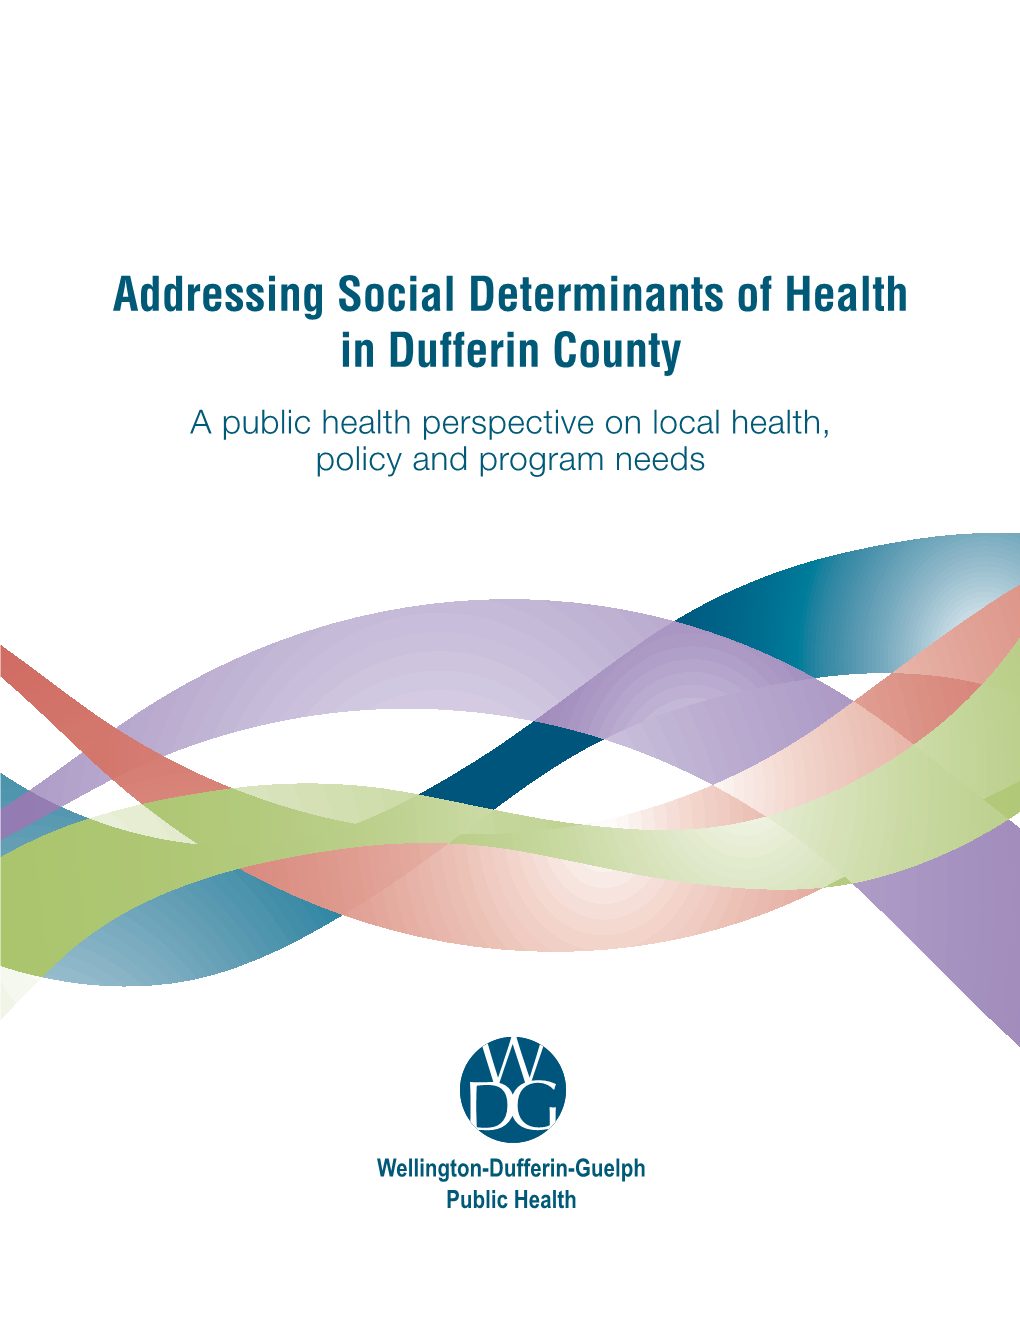 Addressing Social Determinants of Health in Dufferin County a Public Health Perspective on Local Health, Policy and Program Needs